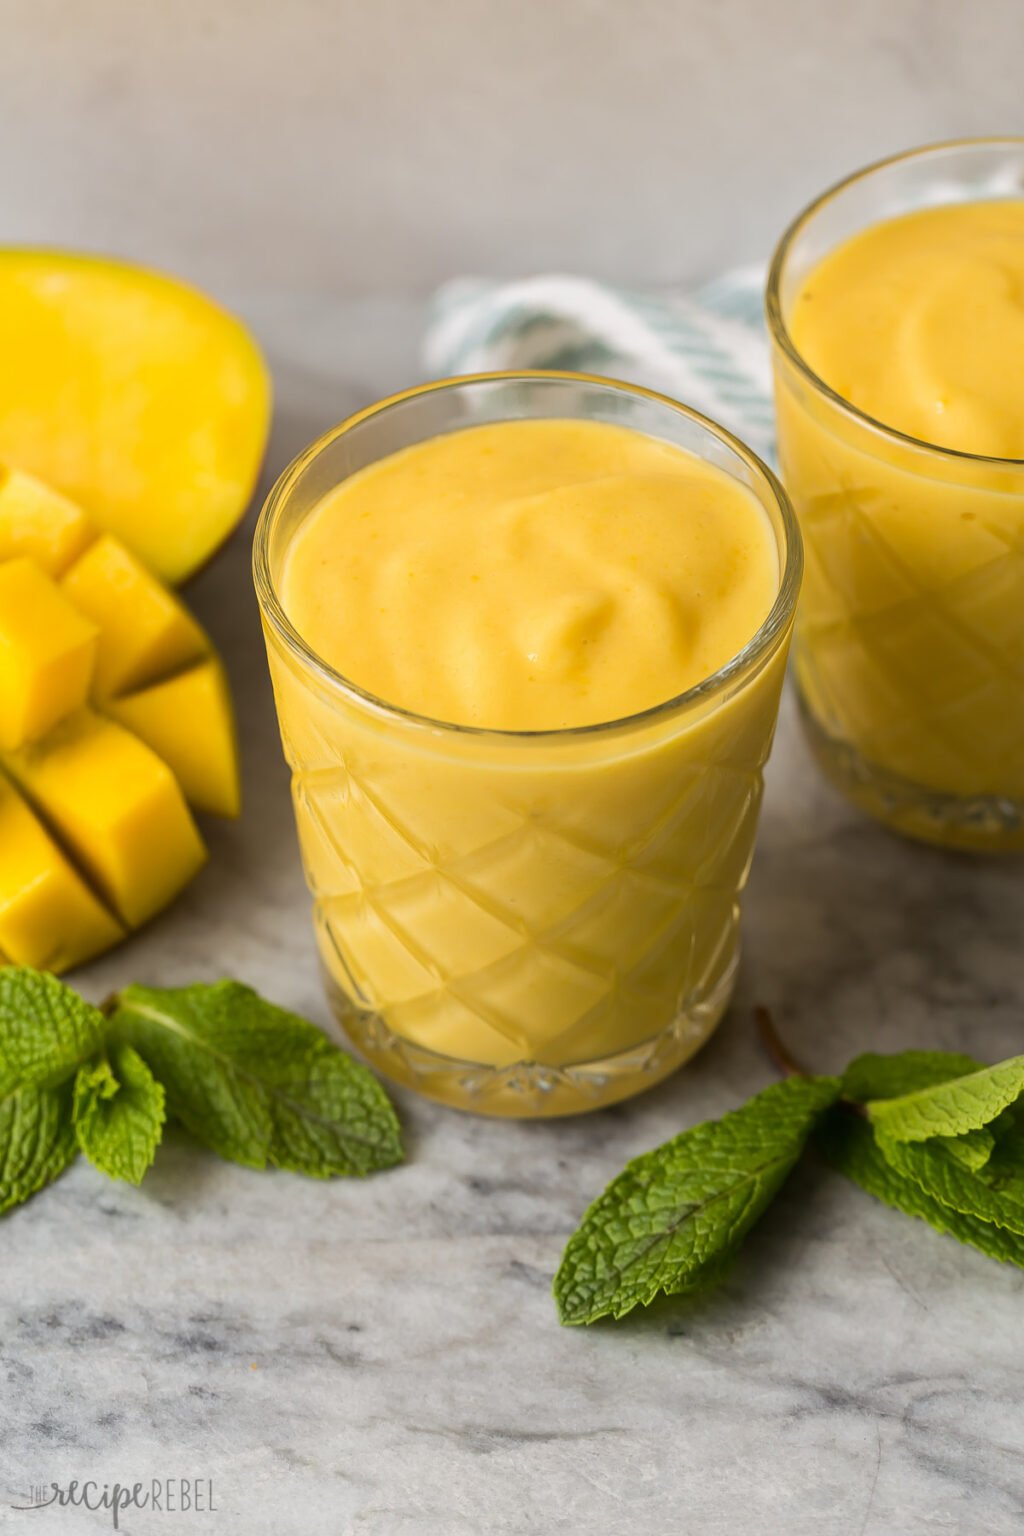 Mango Smoothie - easy and healthy! [VIDEO] - The Recipe Rebel